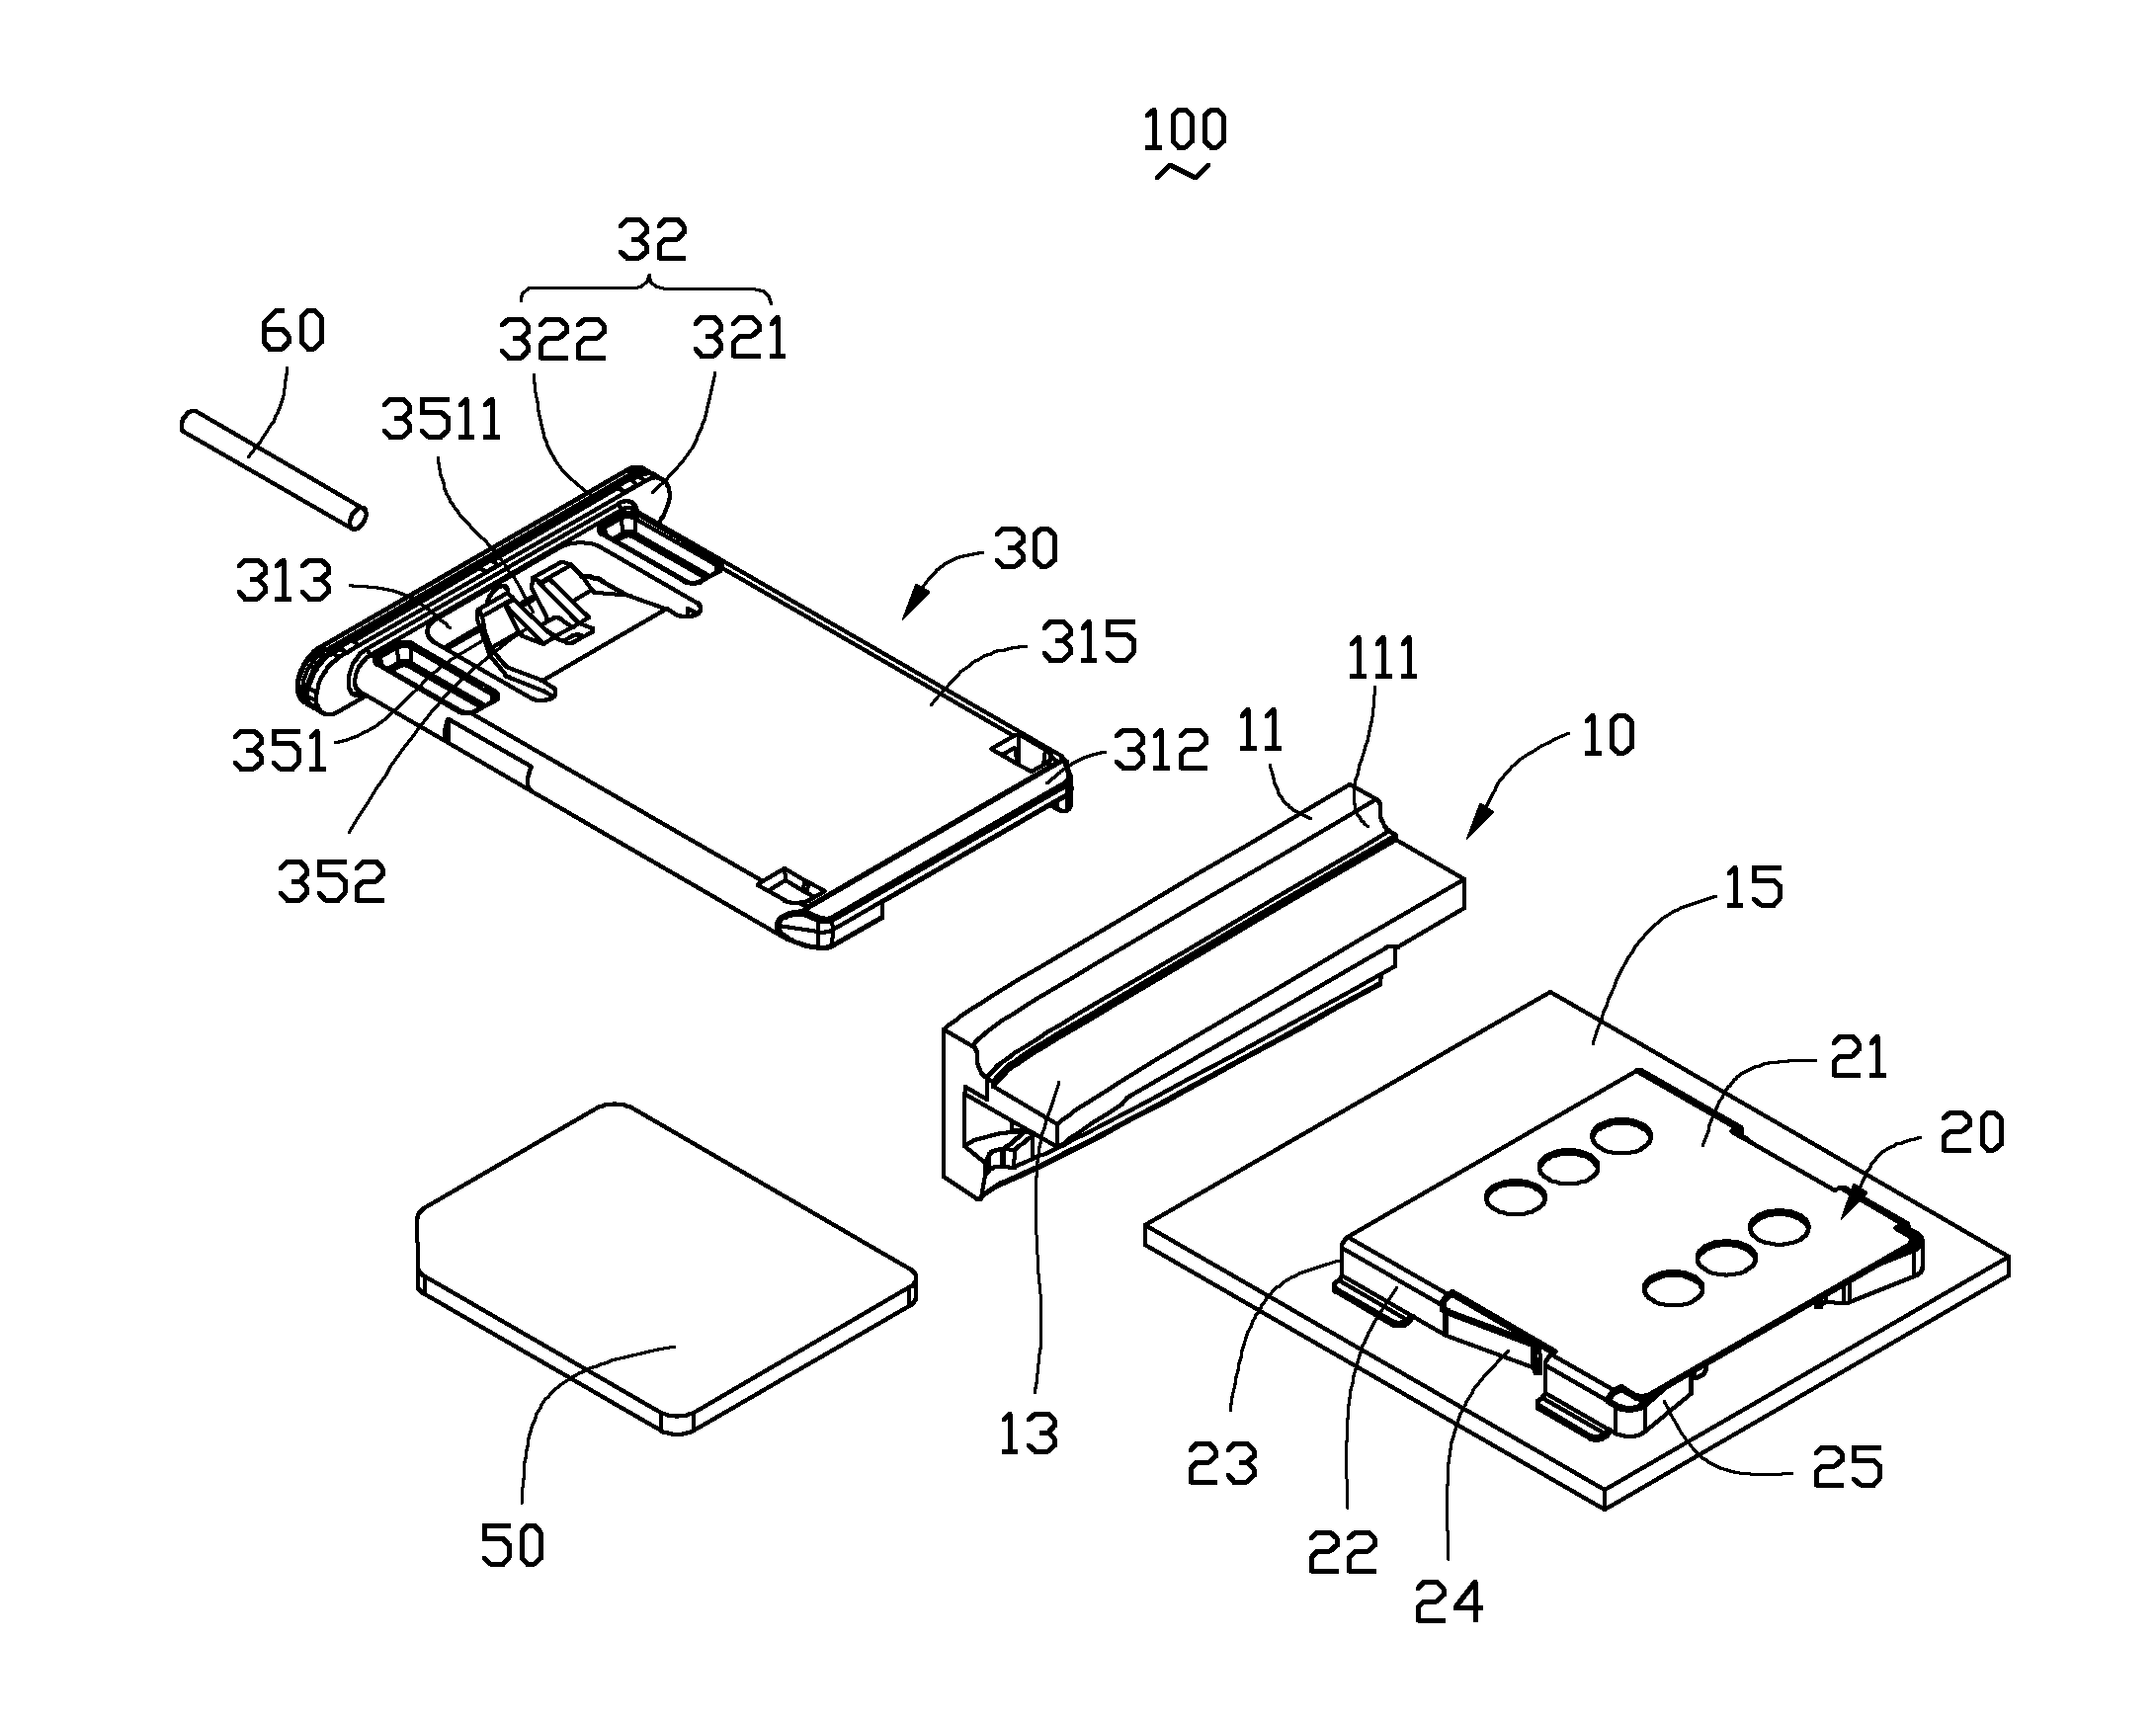 Chip card holder for electronic device